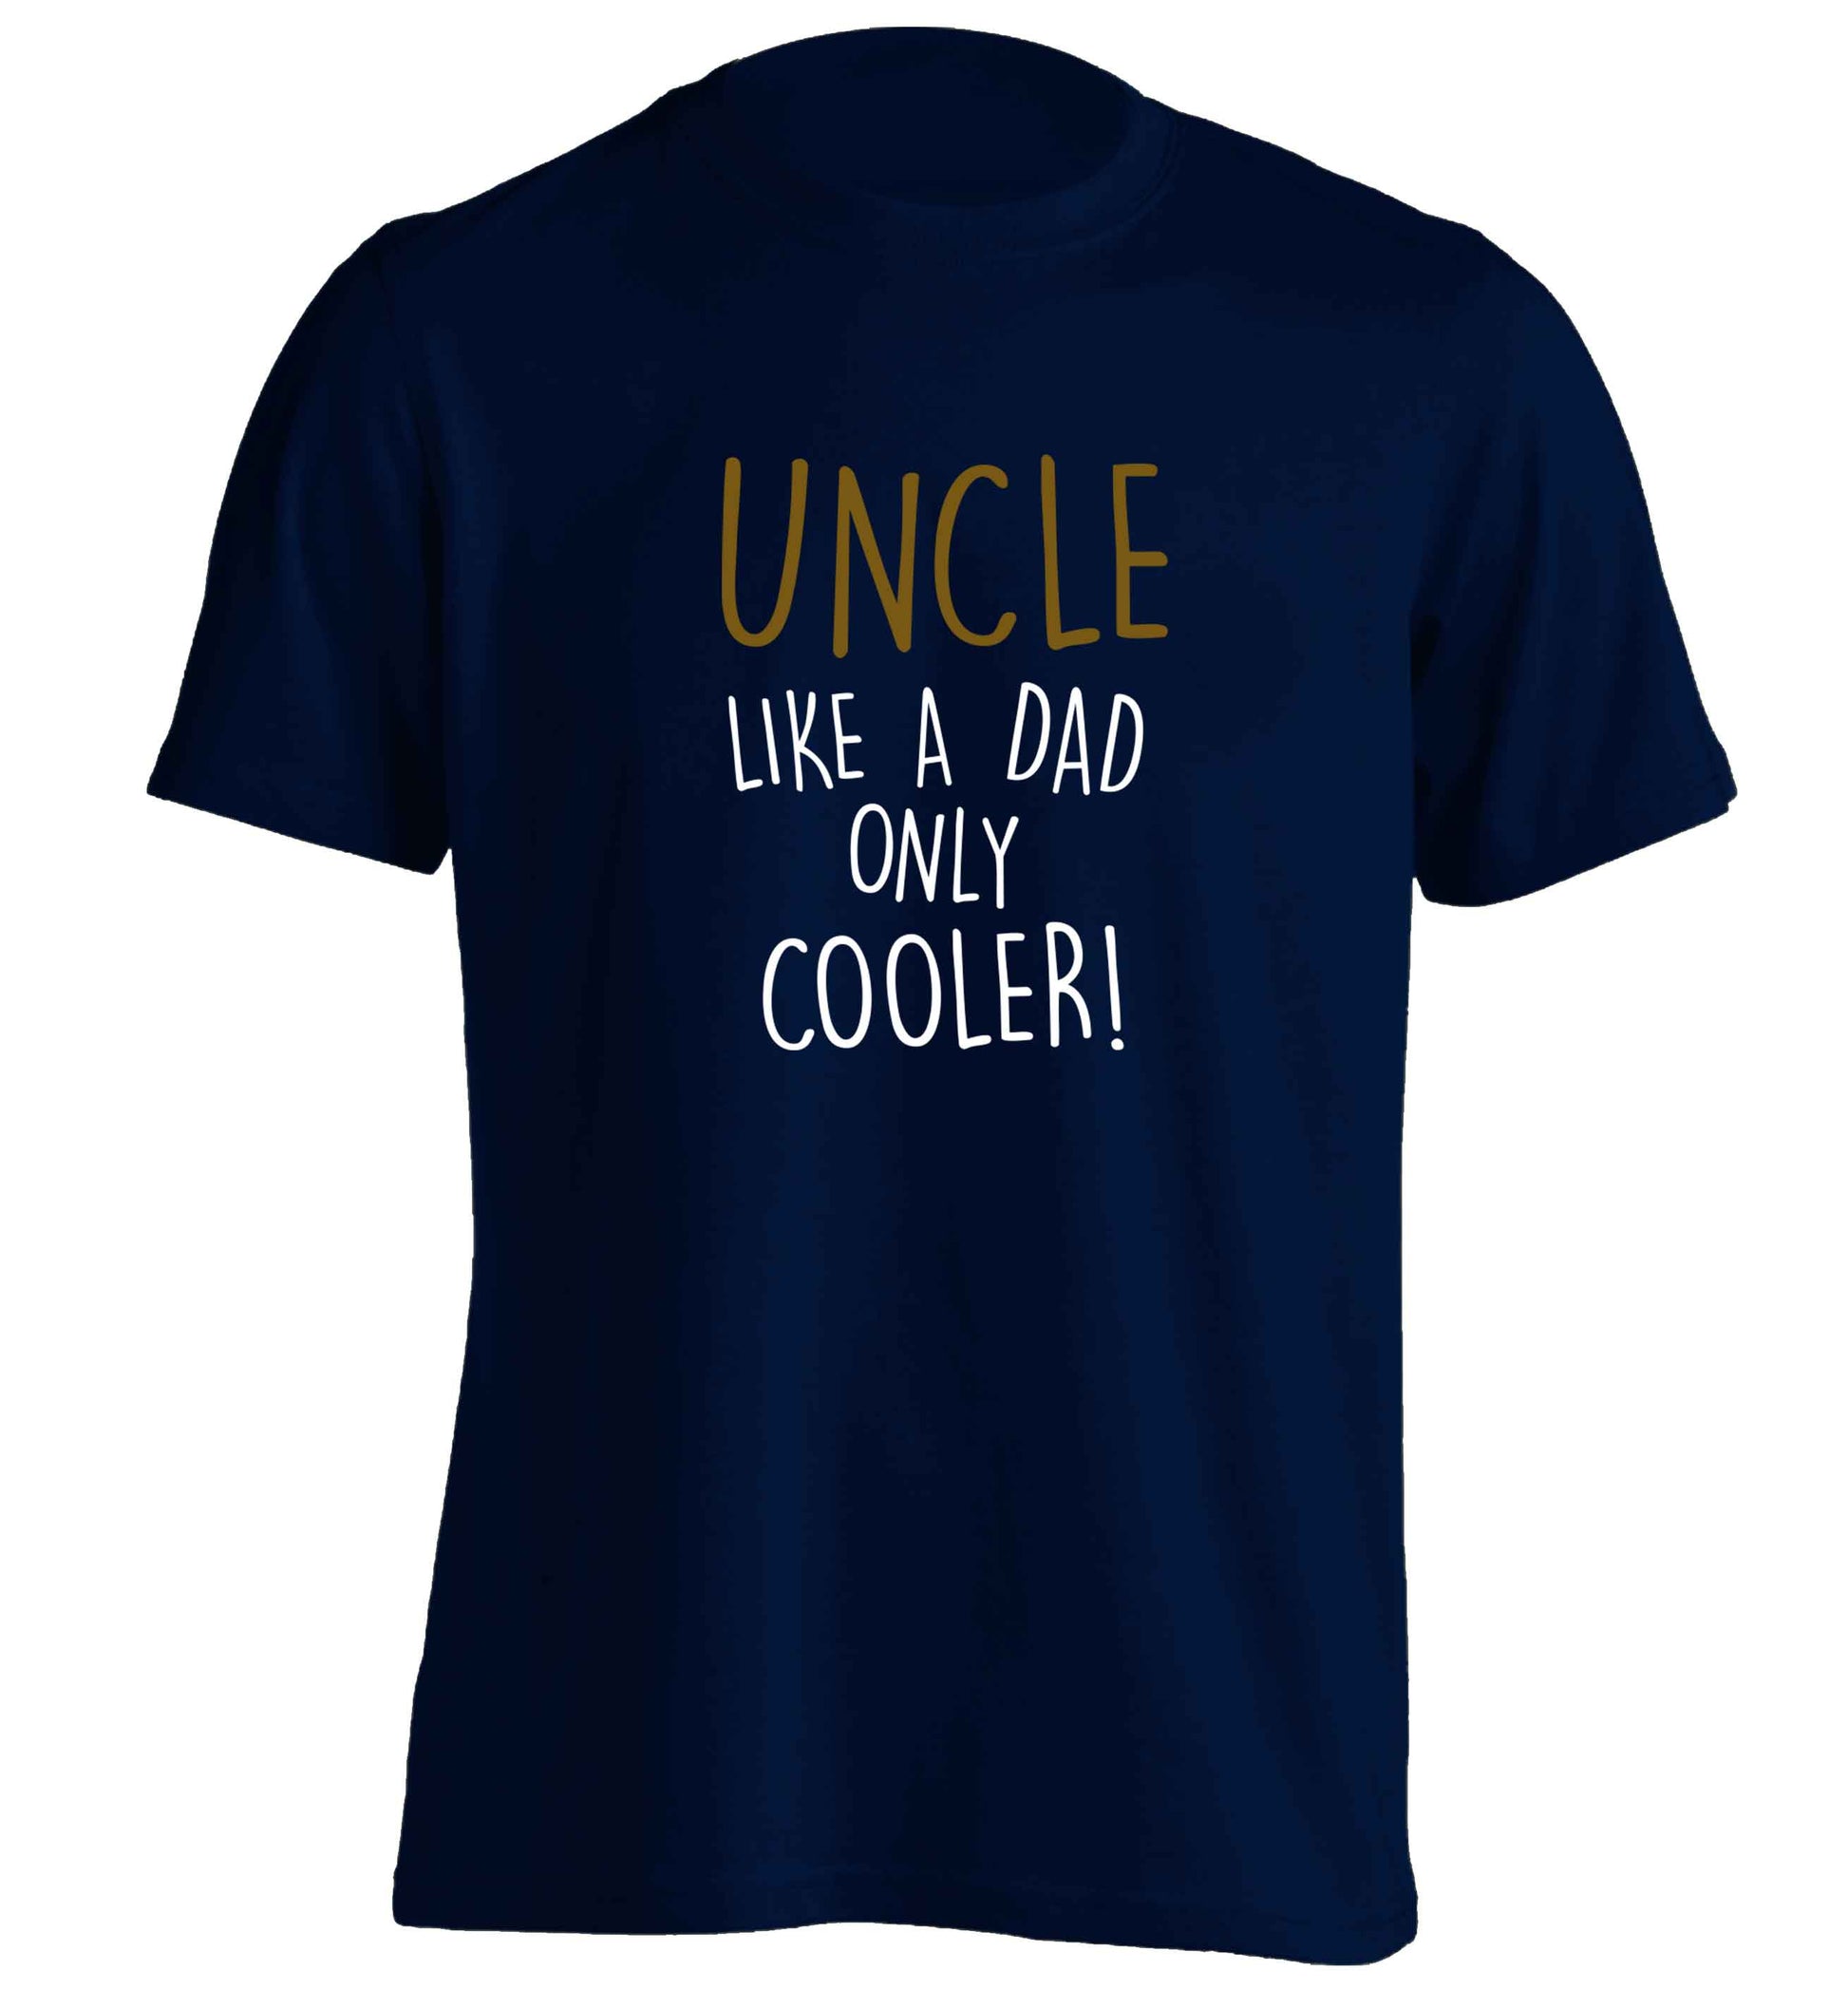 Uncle like a dad only cooler adults unisex navy Tshirt 2XL